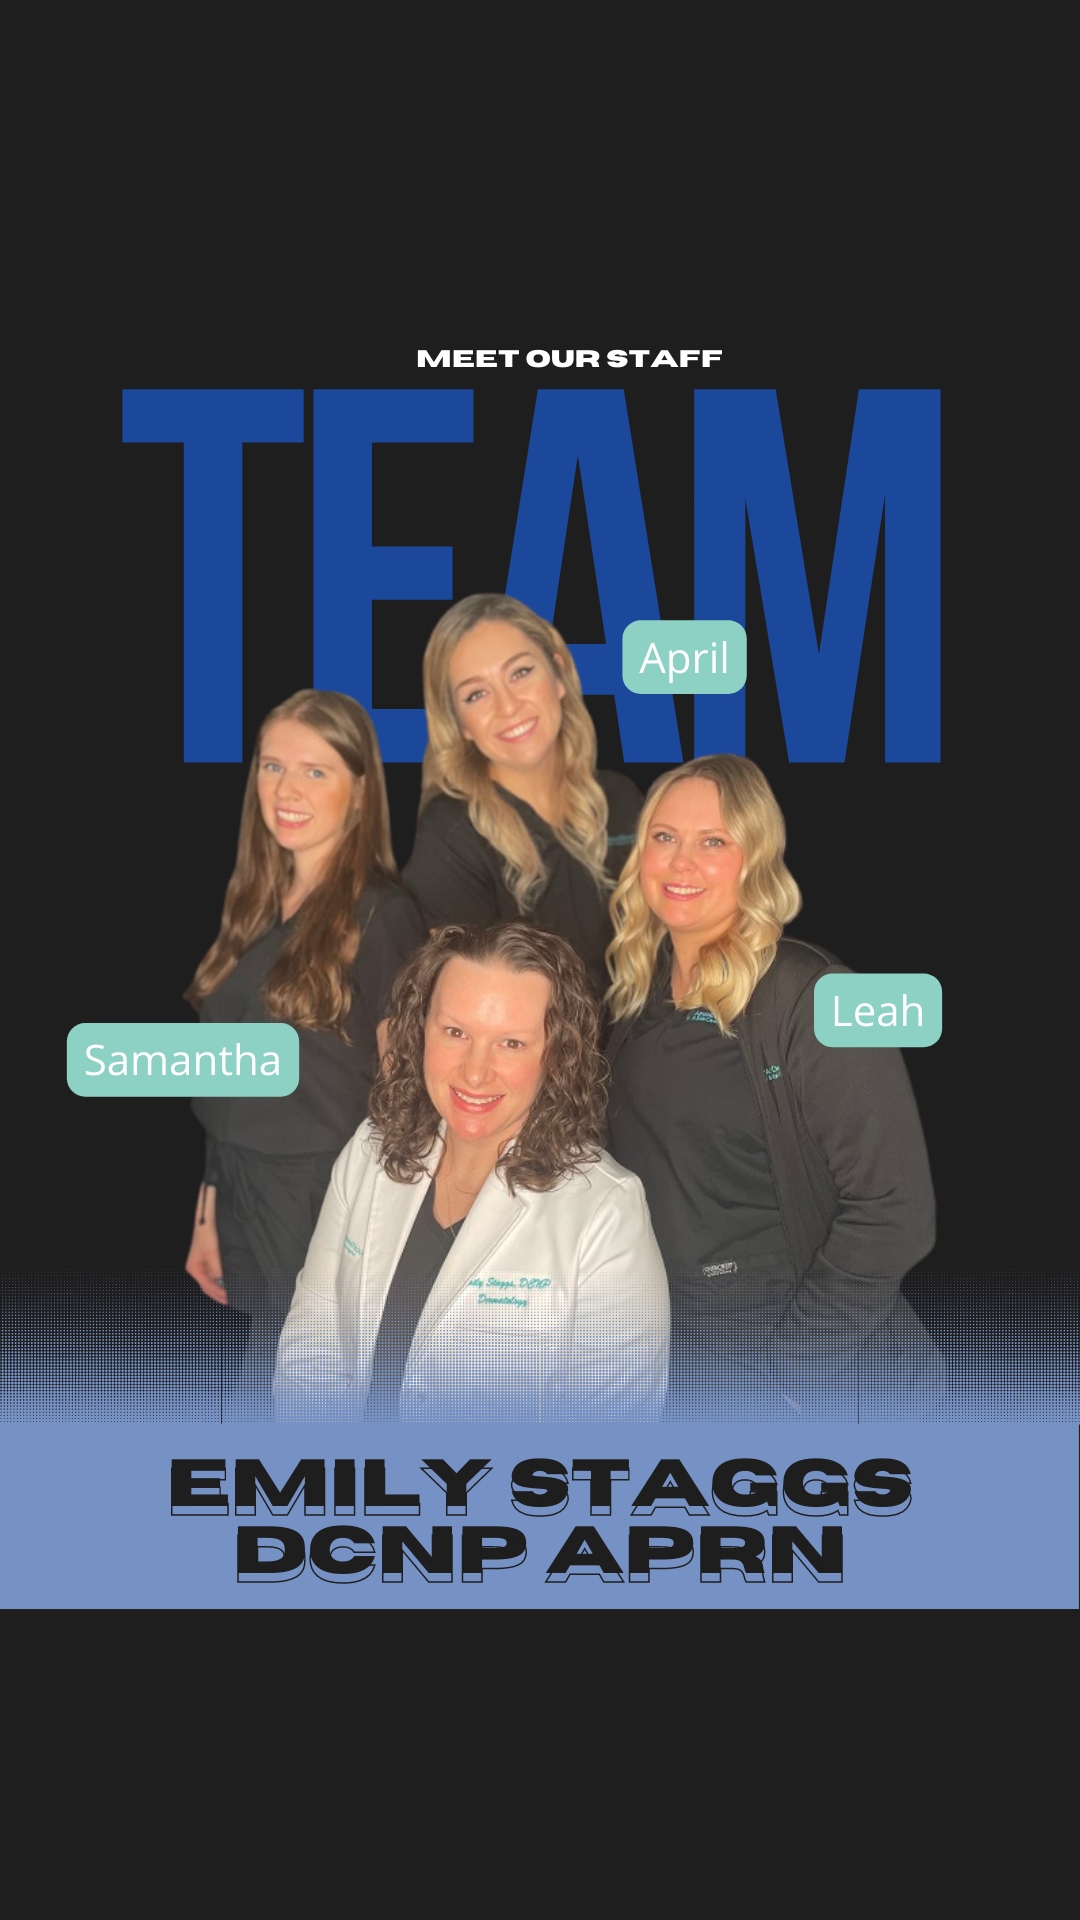 Emily and team